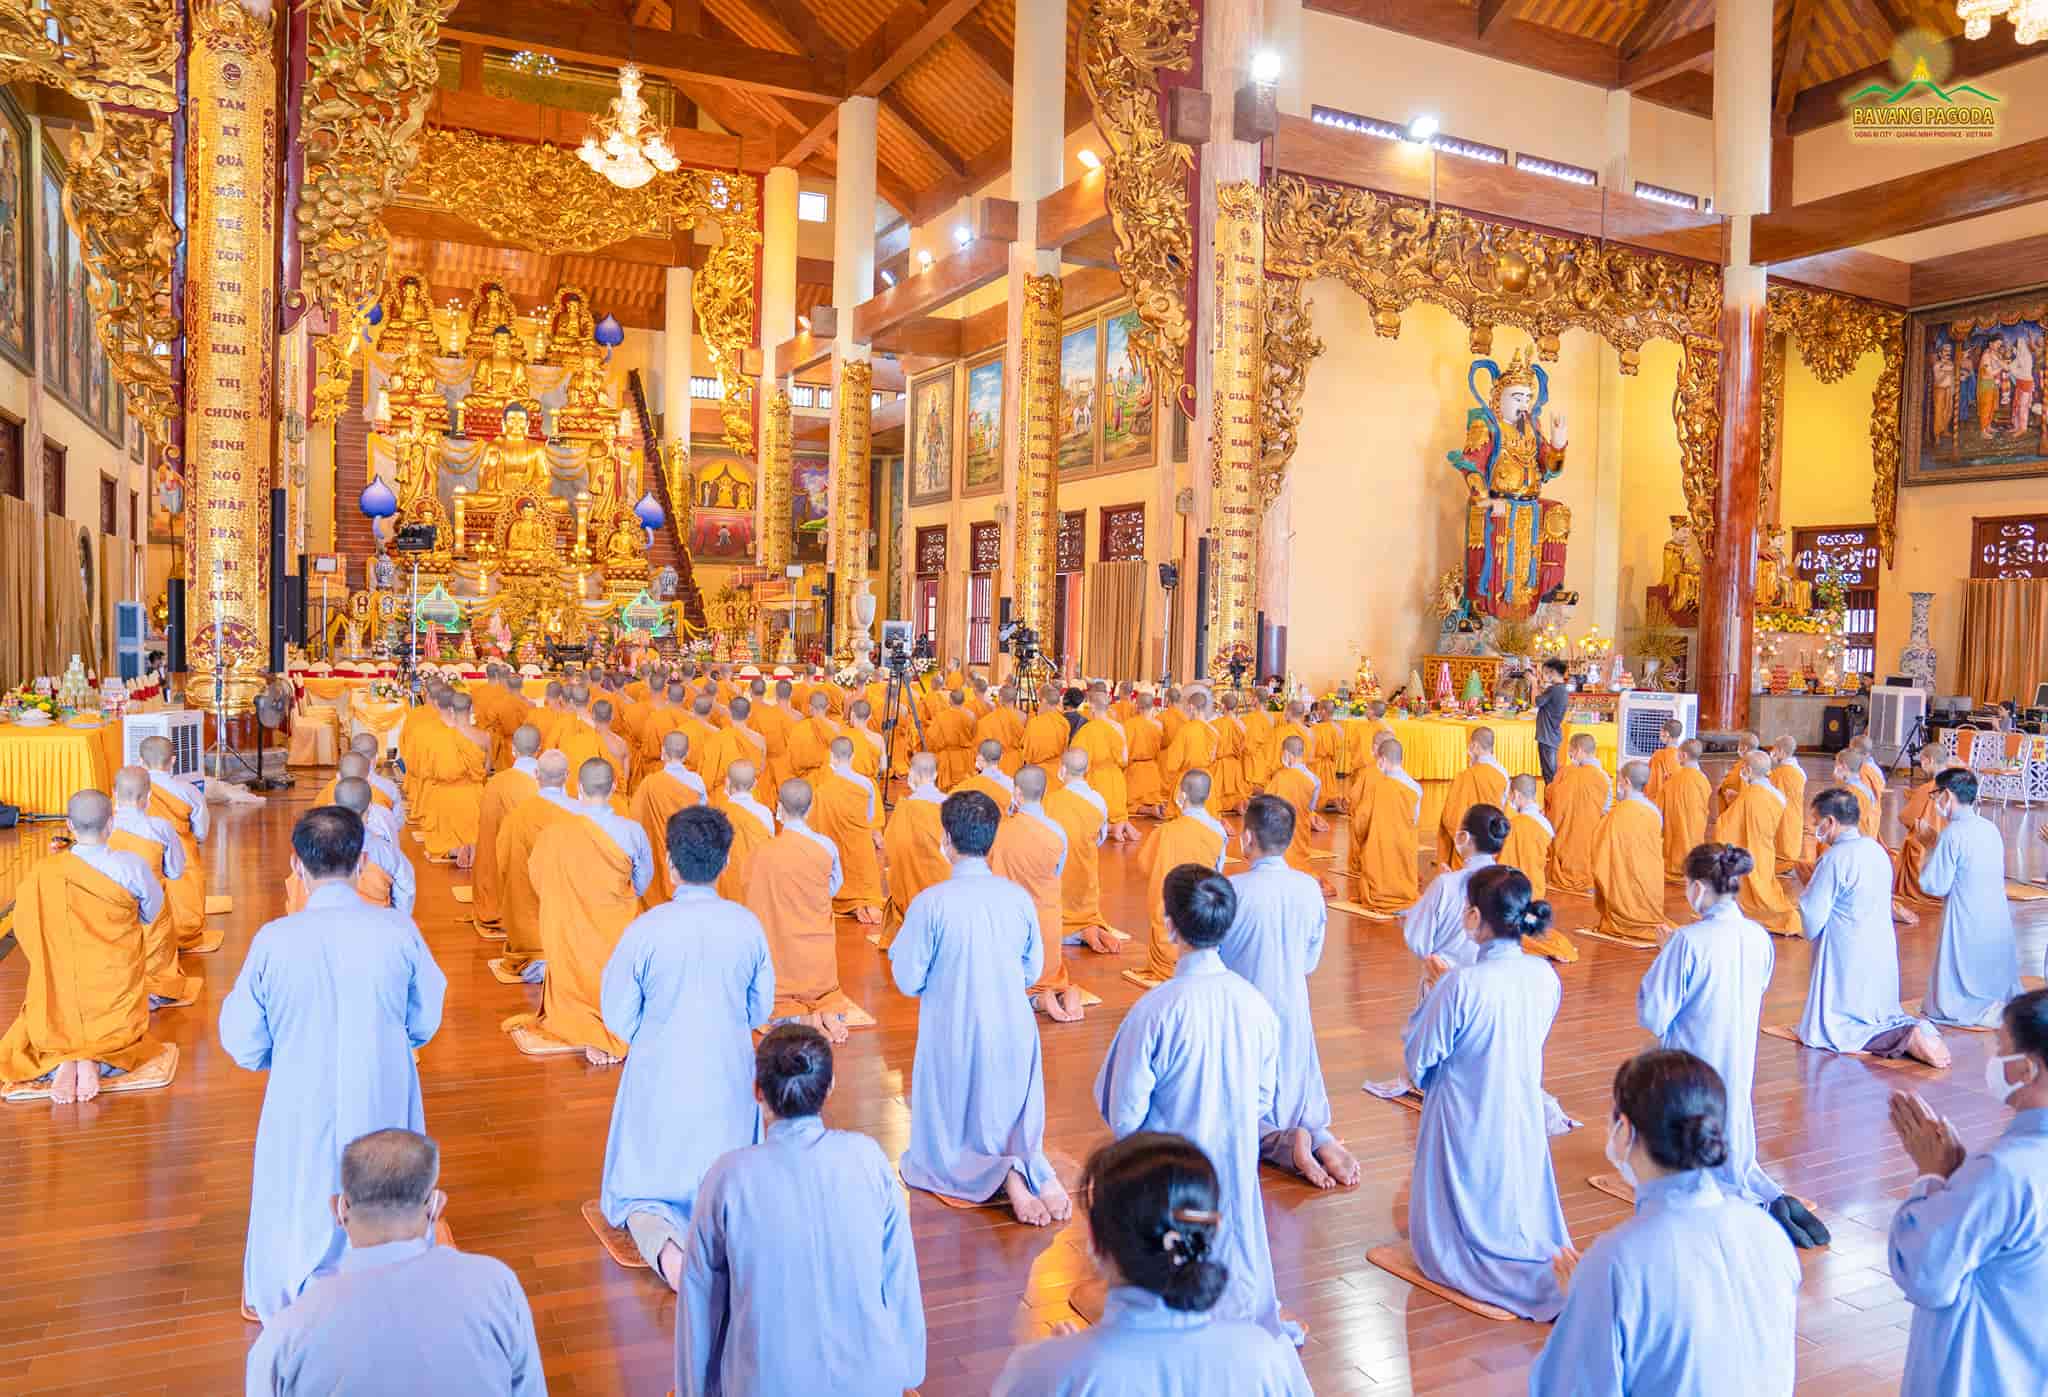 The community of Ba Vang Pagoda respectfully kneeling generating the Bodhi mind in the witness of Thay Thich Truc Thai Minh.